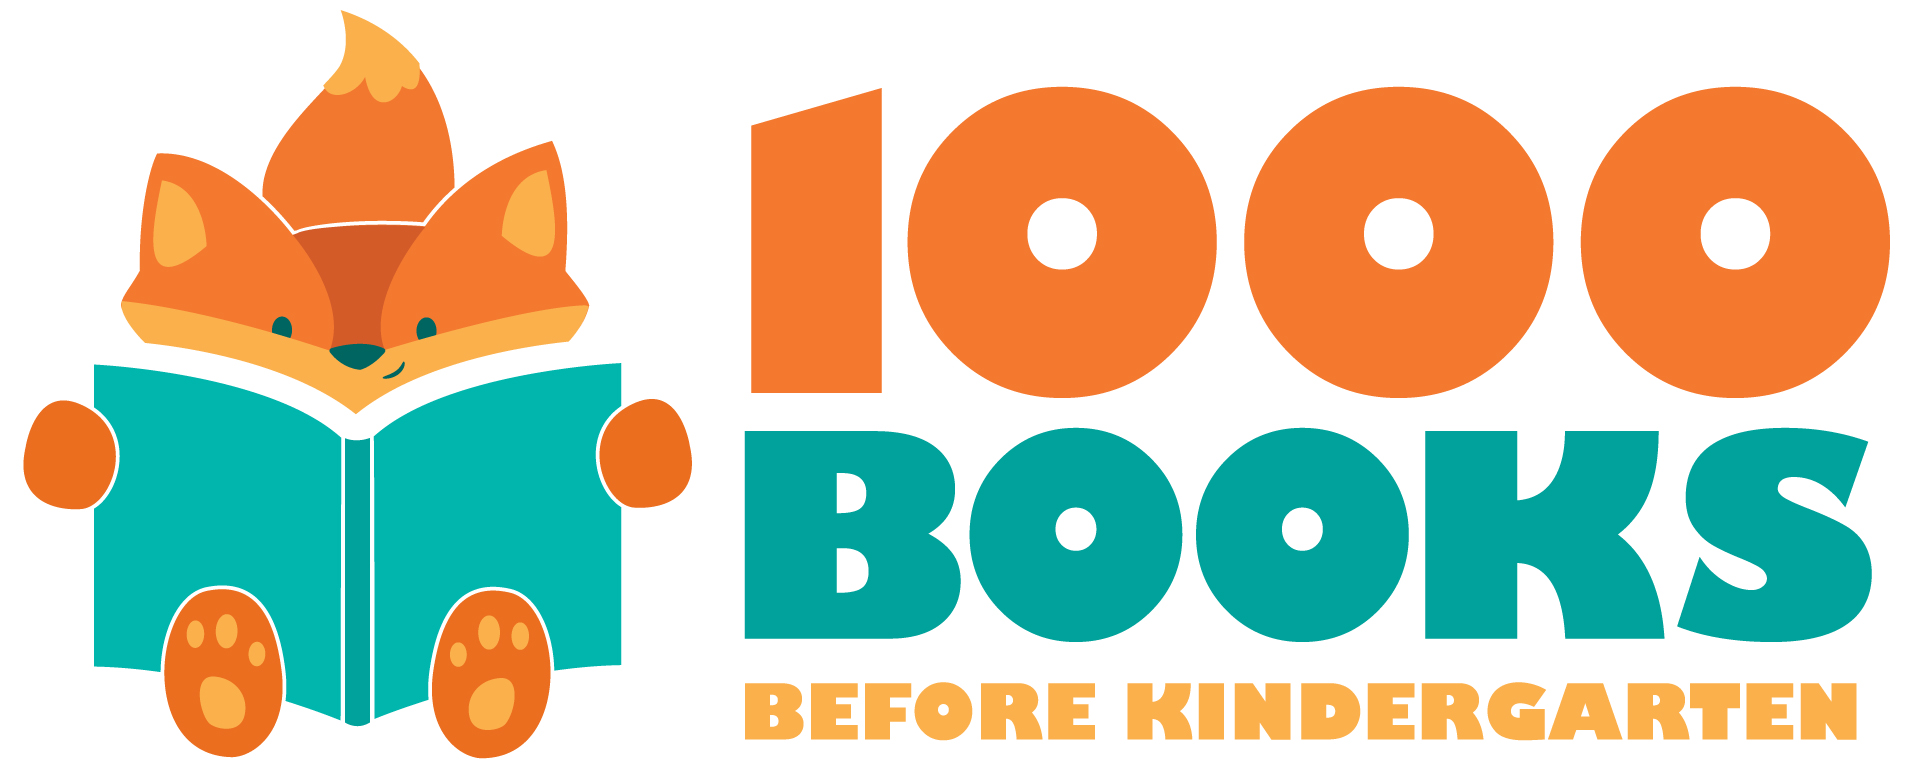 1000 Books Before Kindergarten logo with fox reading a book